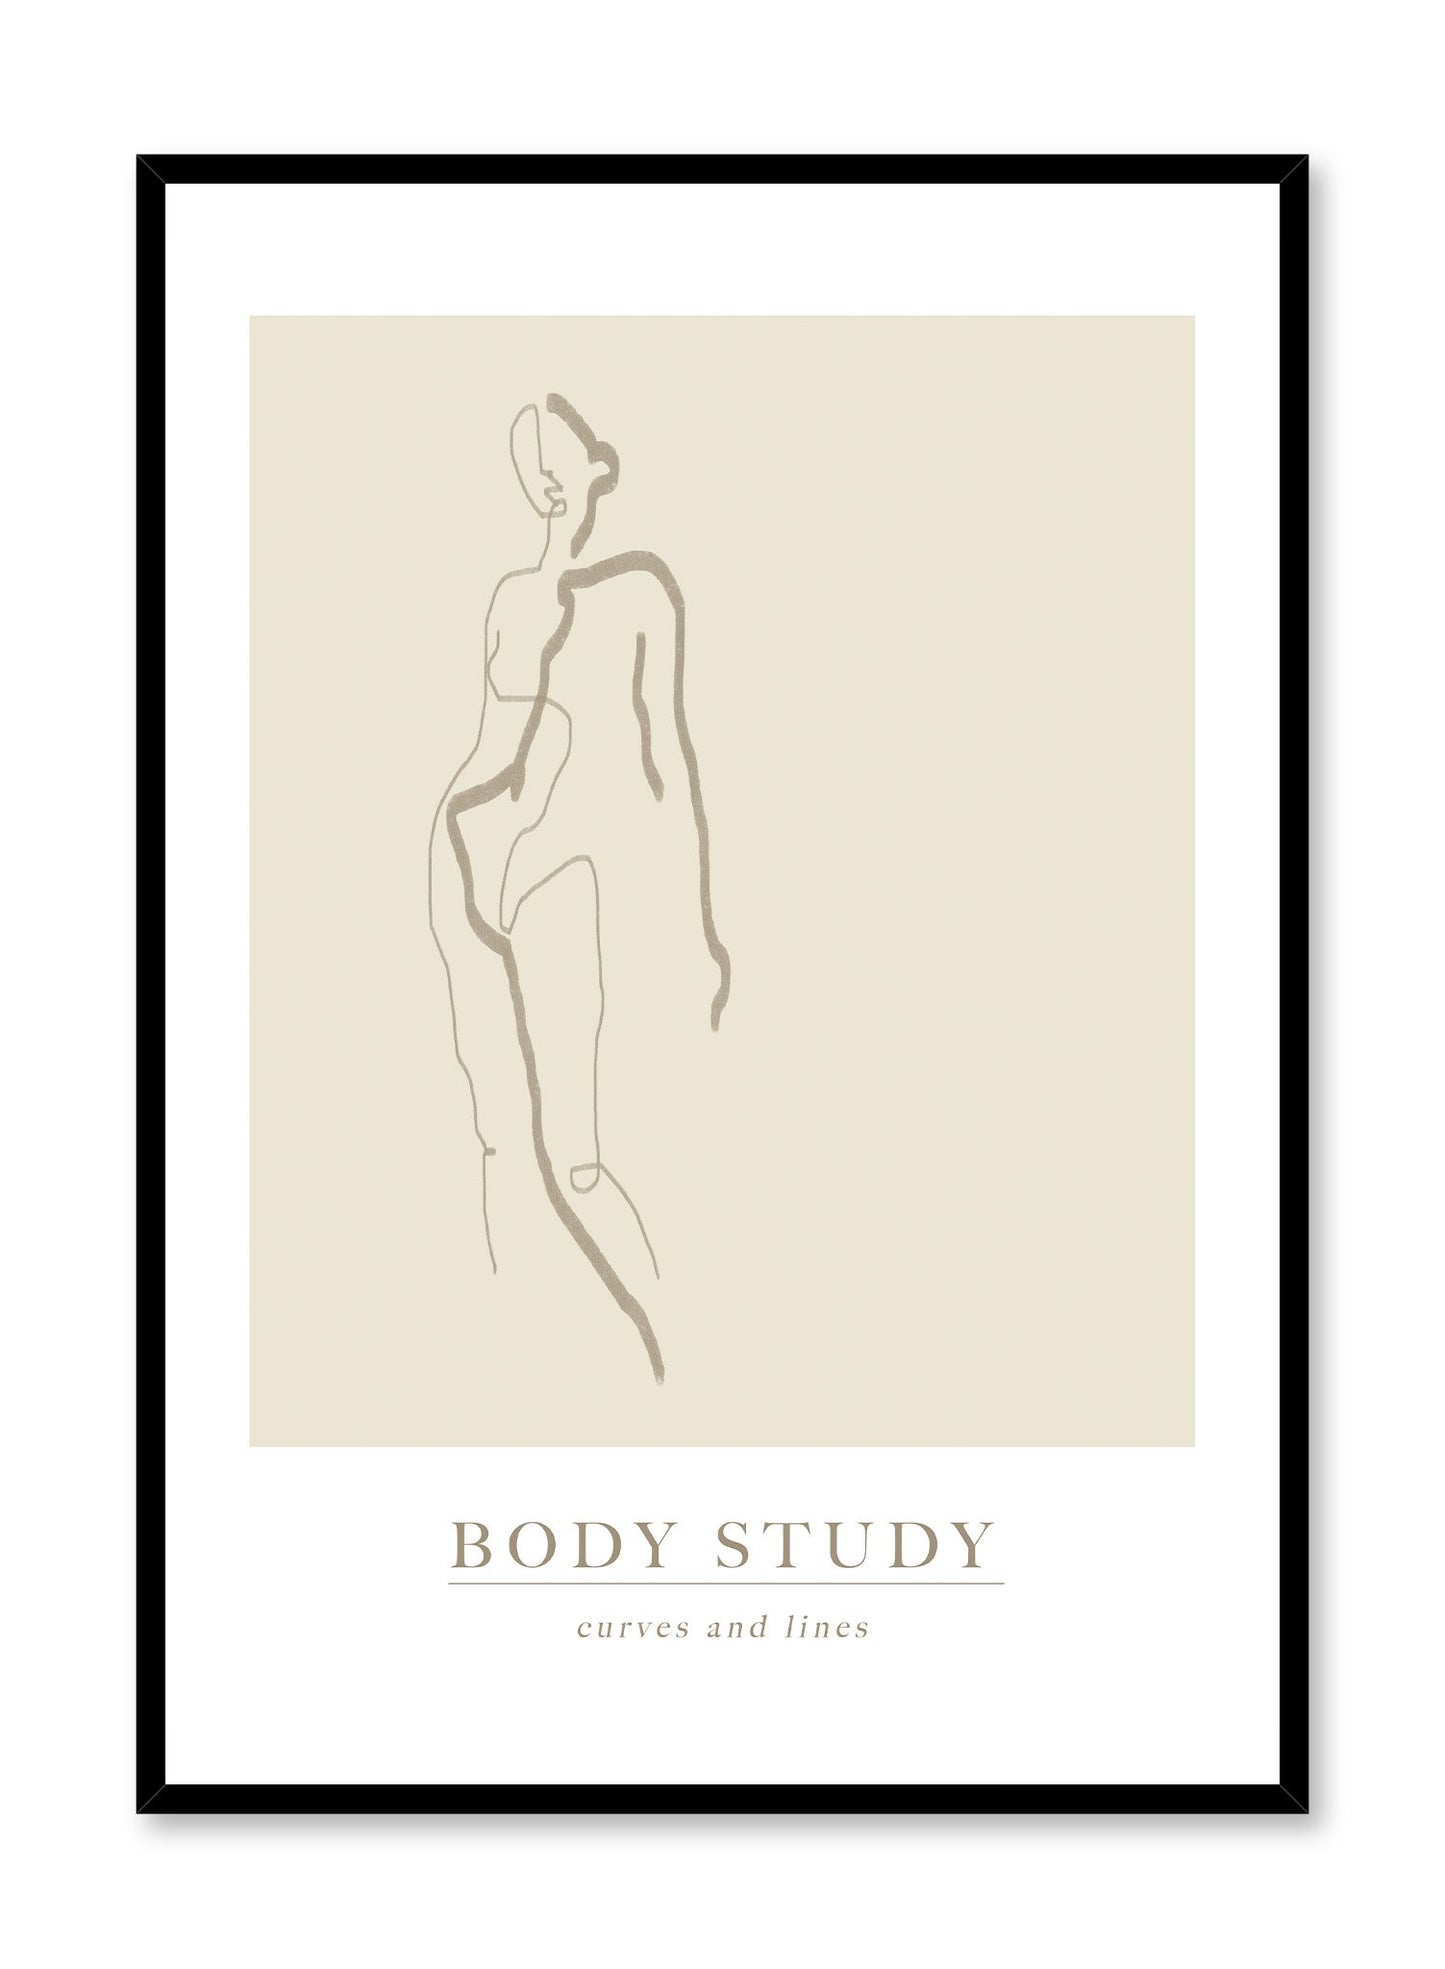 Fluid is a line art illustration of a woman's front silhouette by Opposite Wall.